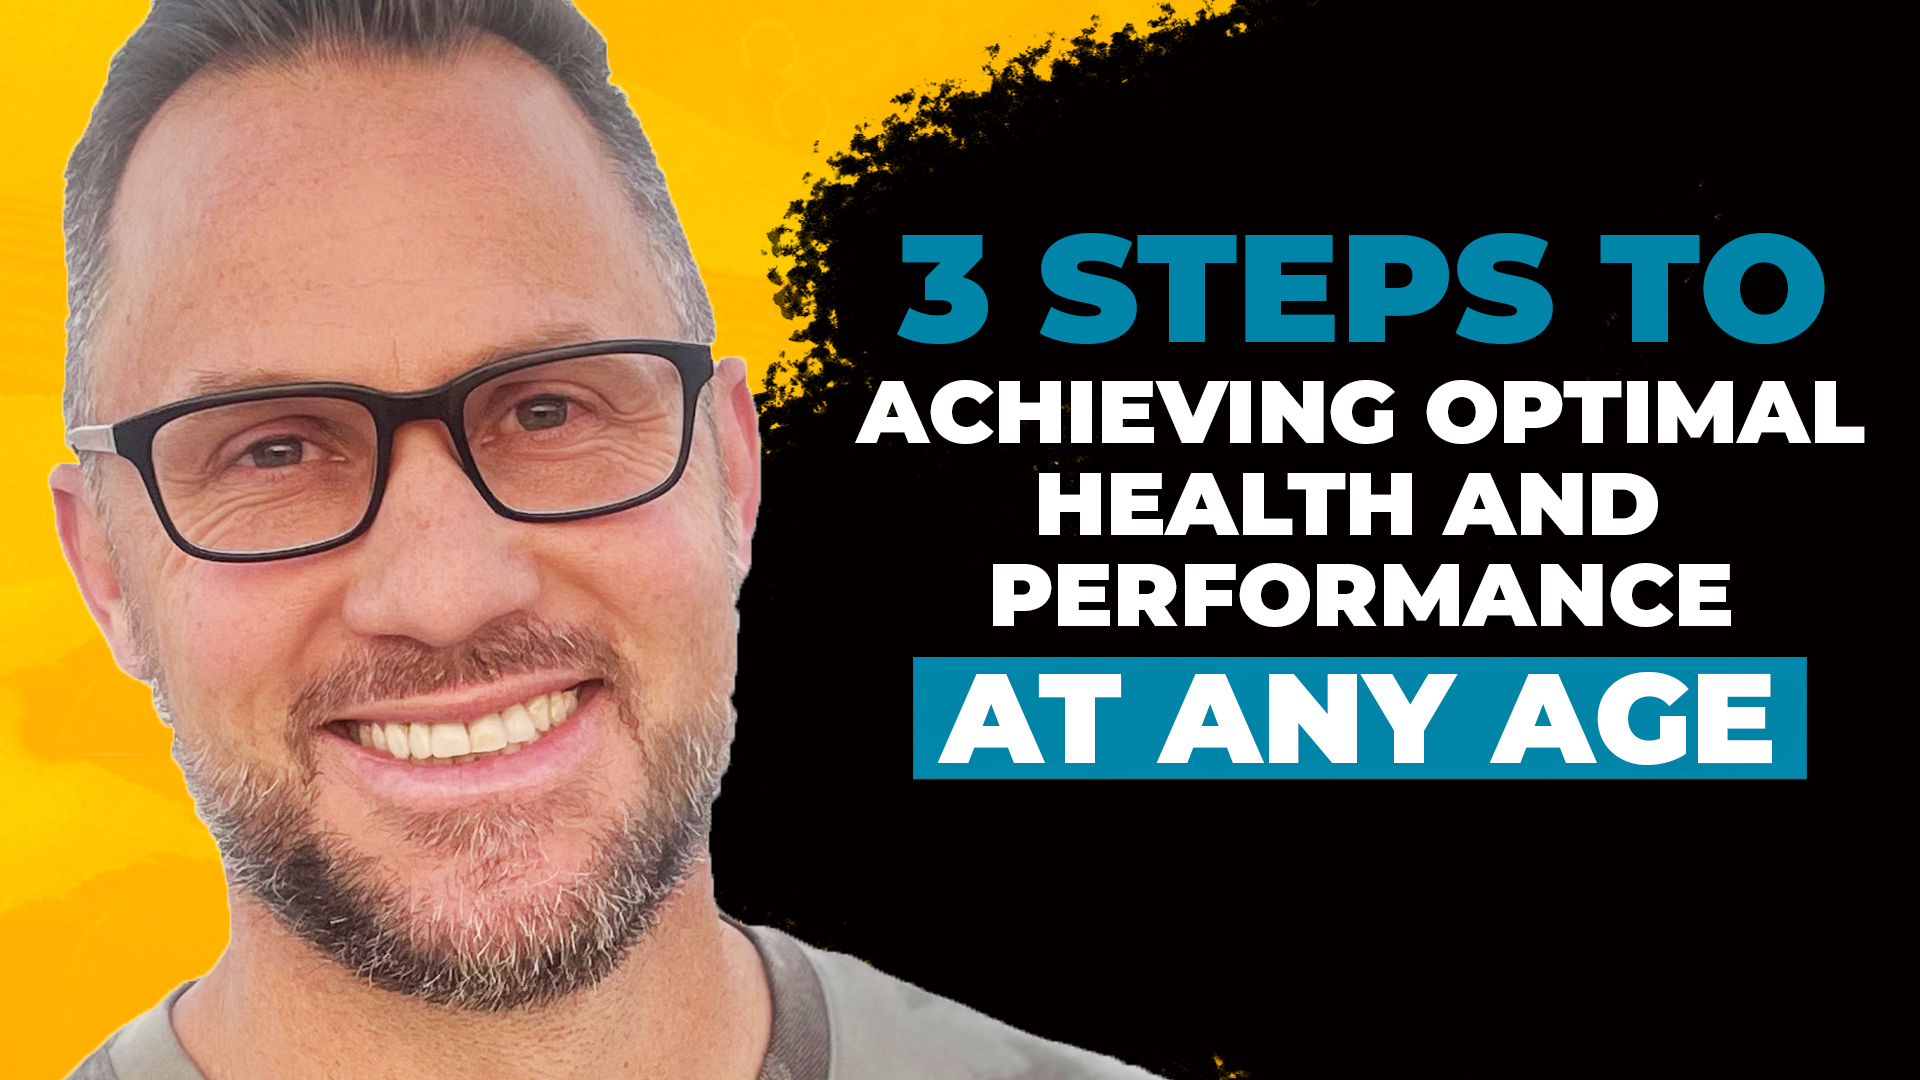 EP#174 - 3 Steps To Achieving Optimal Health and Performance At ANY Age